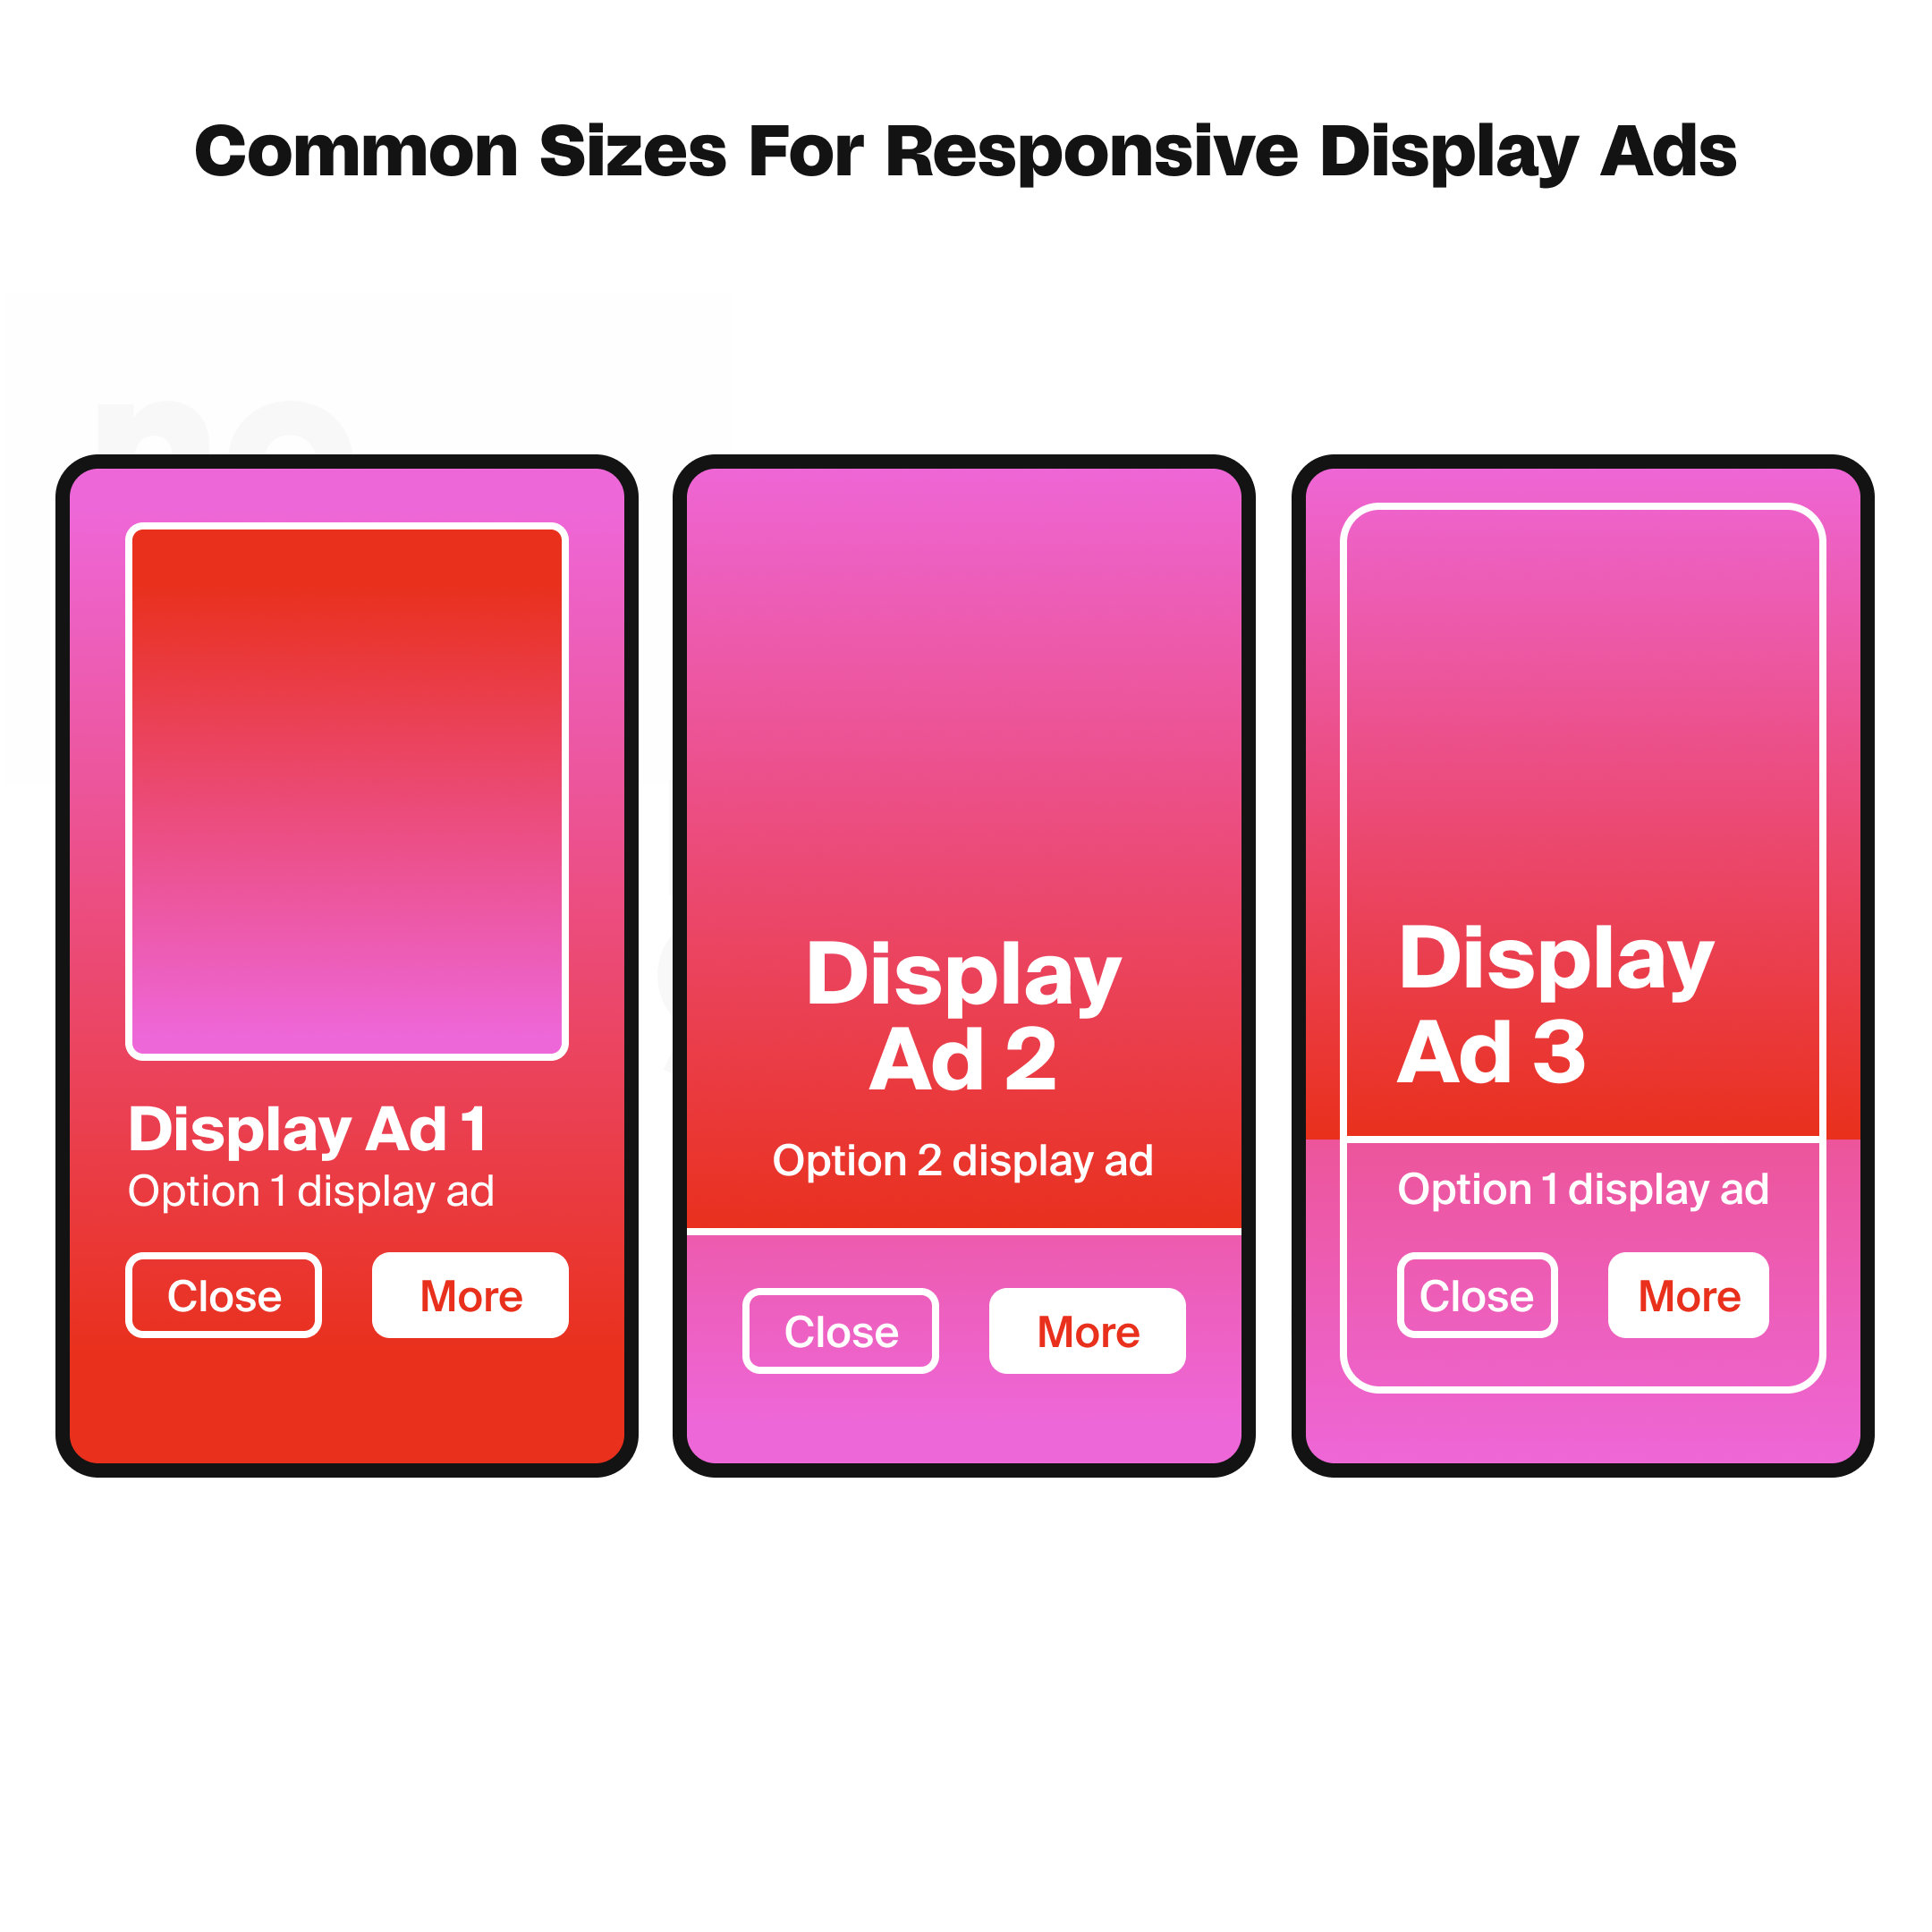 Common sizes for responsive display ads